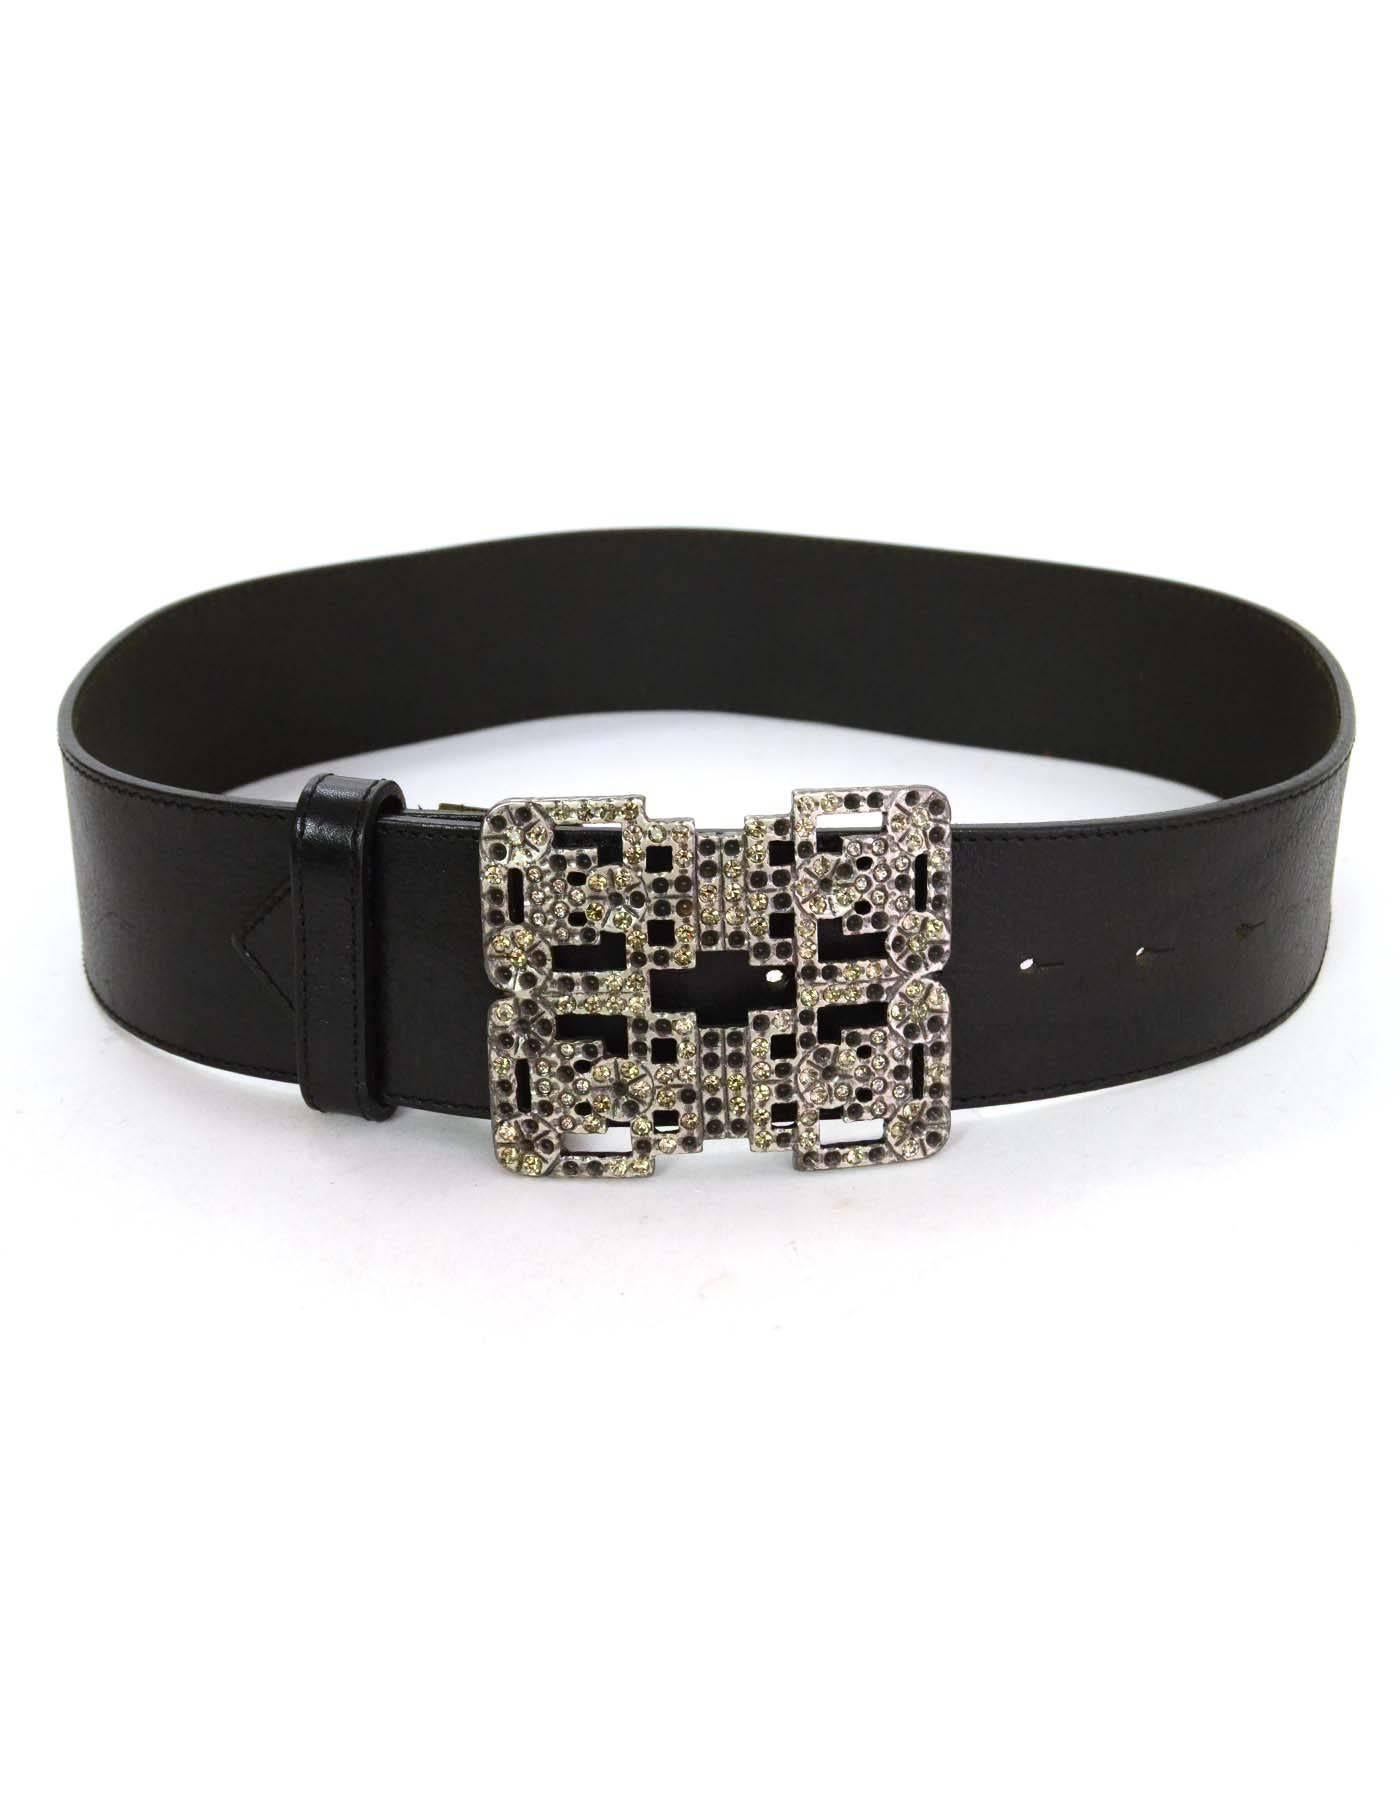 Paul & Joe Black Leather Belt with Rhinestone Buckle Sz Small In Good Condition In New York, NY